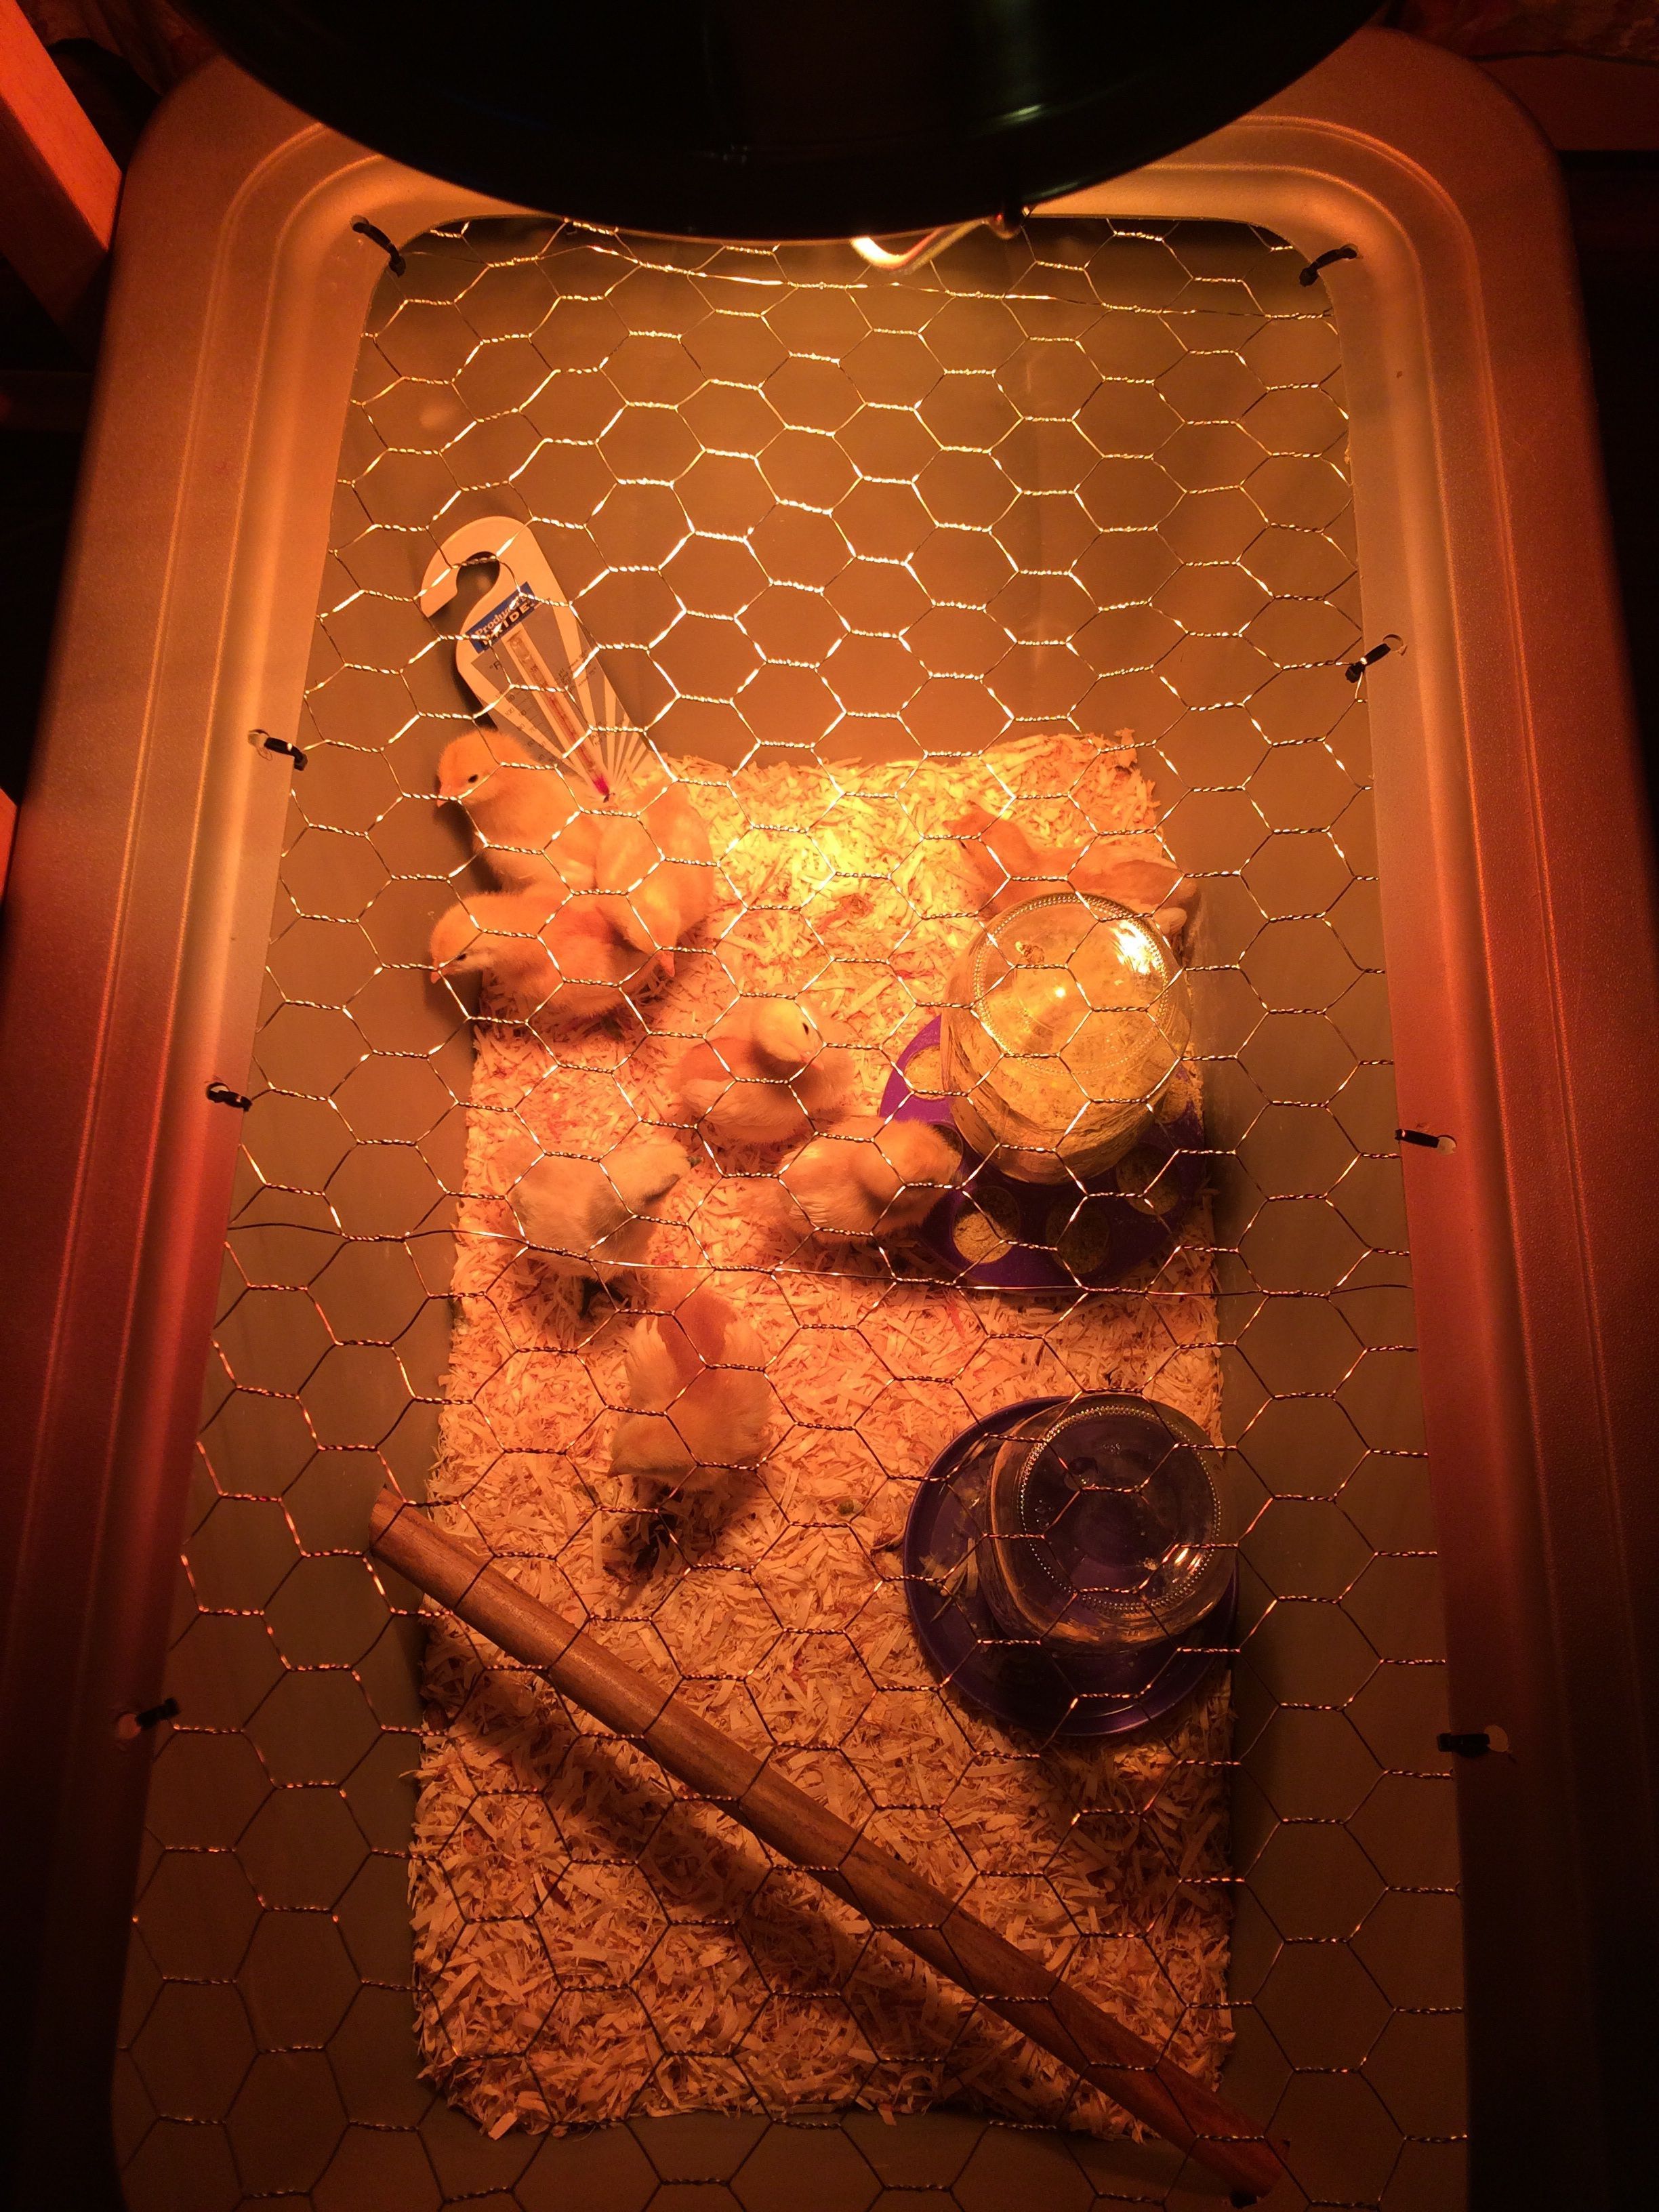 Tote brooder box with our new family members.